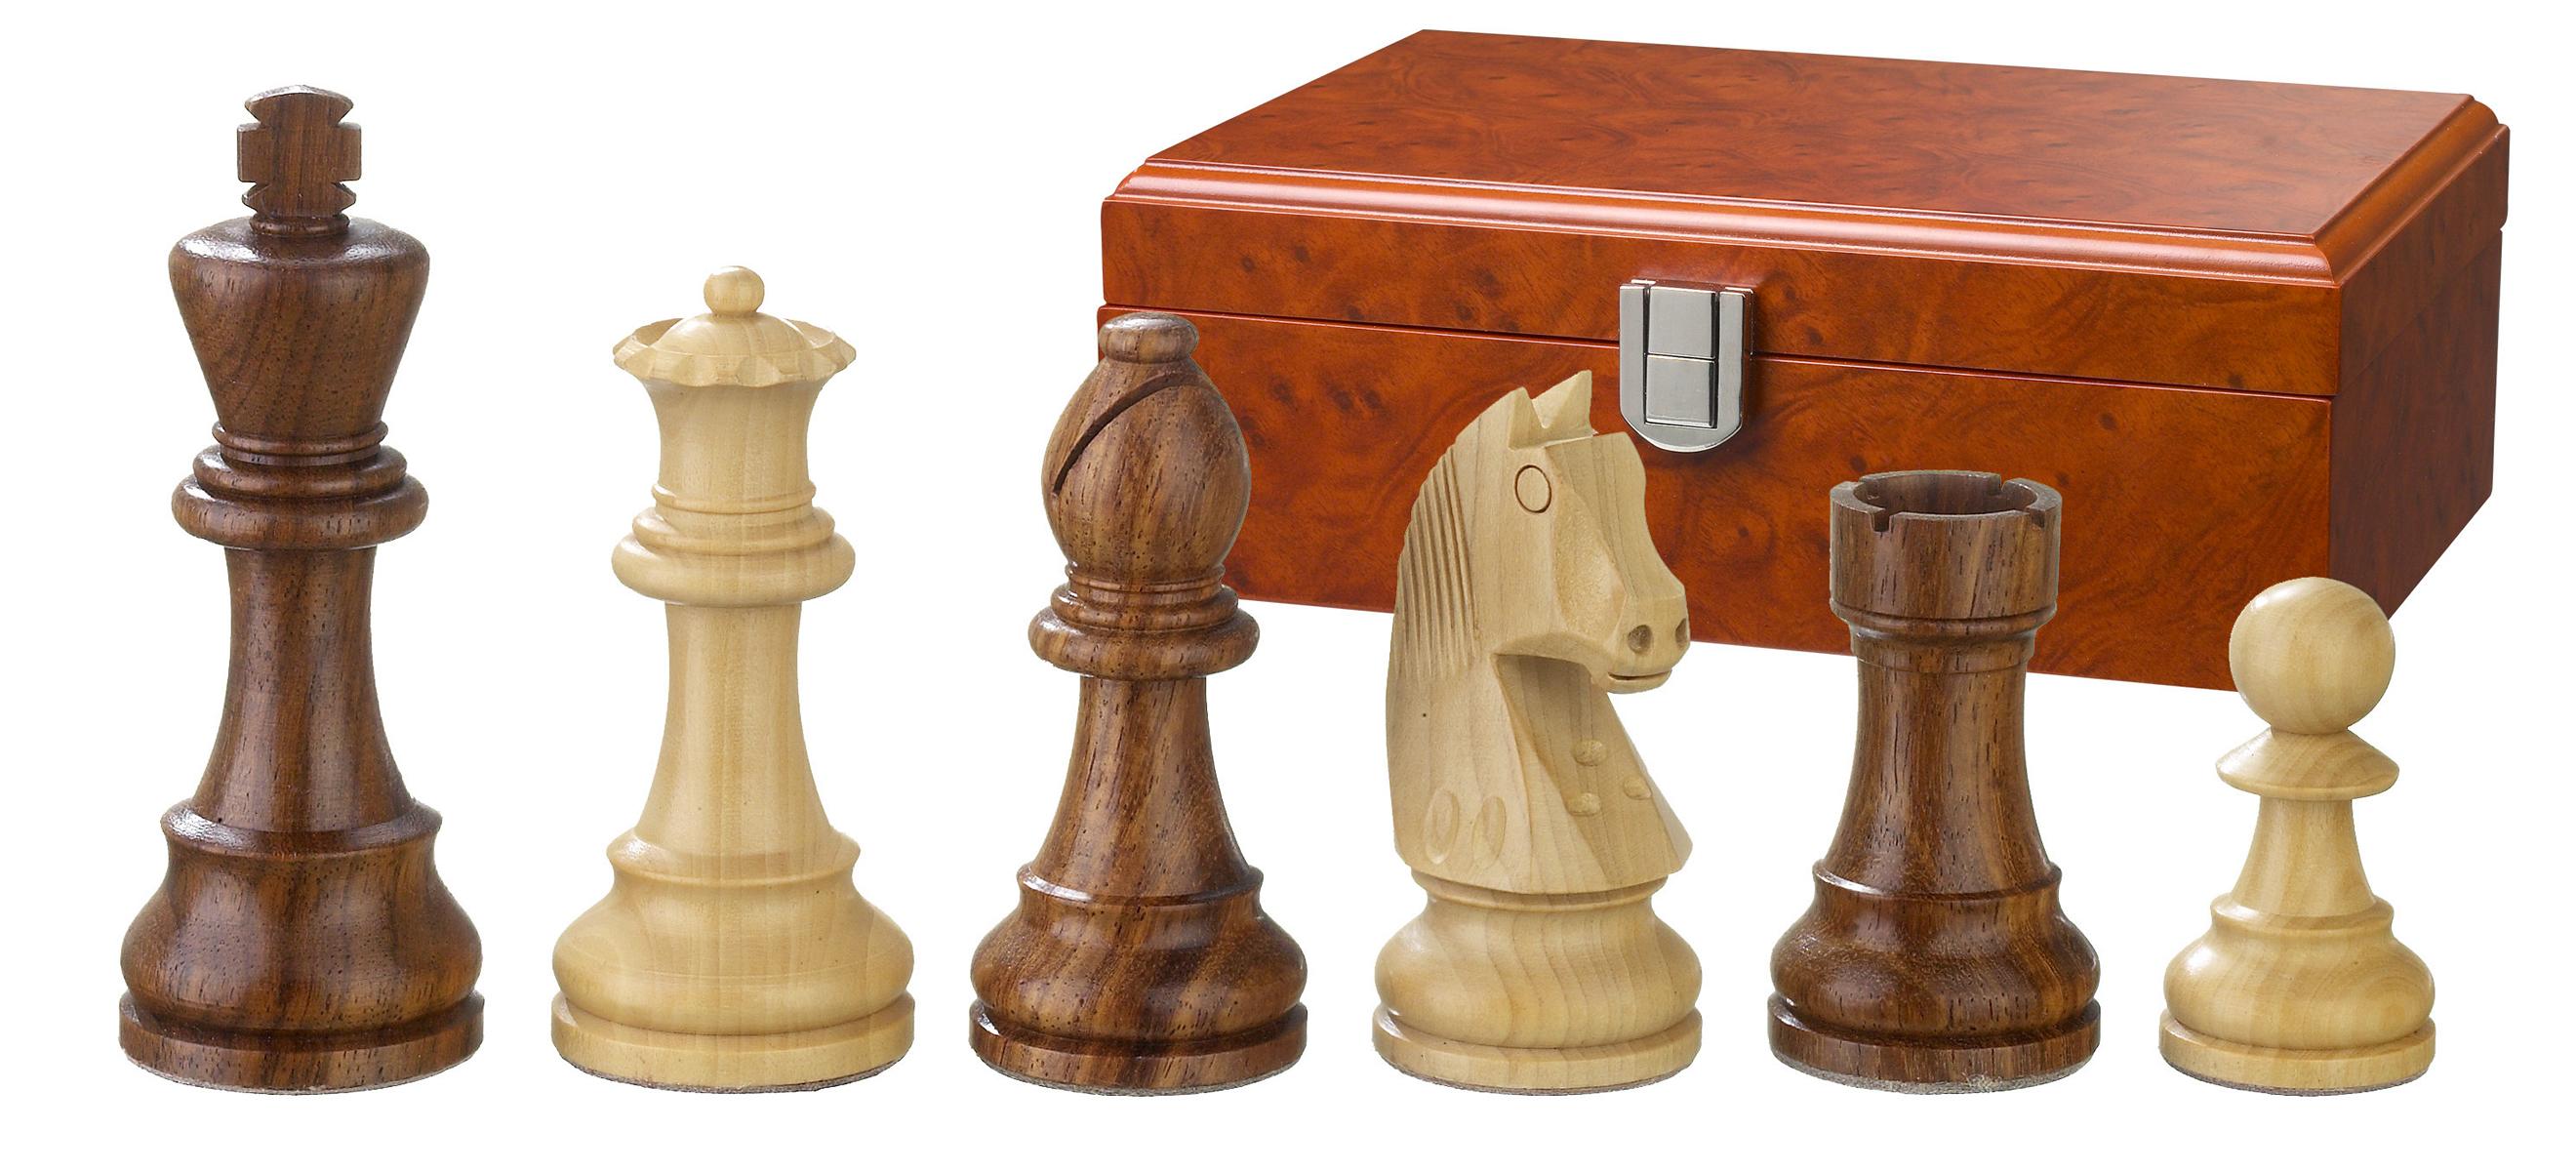 Chess pieces Artus, king height 90 mm, in wooden box